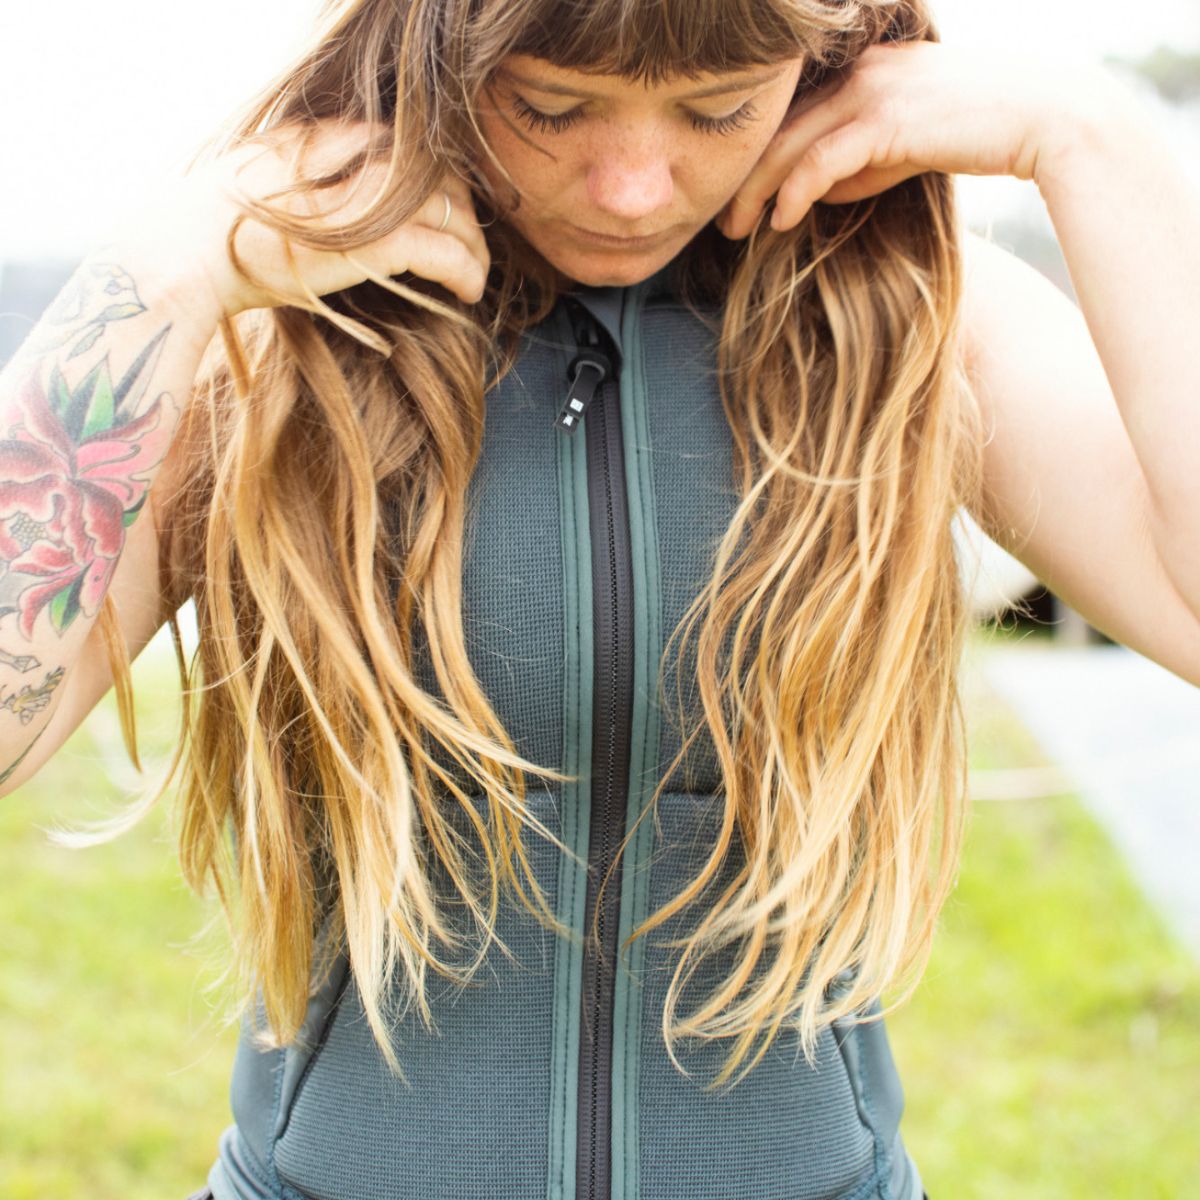 Follow The Rosa Ladies Comp Wake Vest in Olive